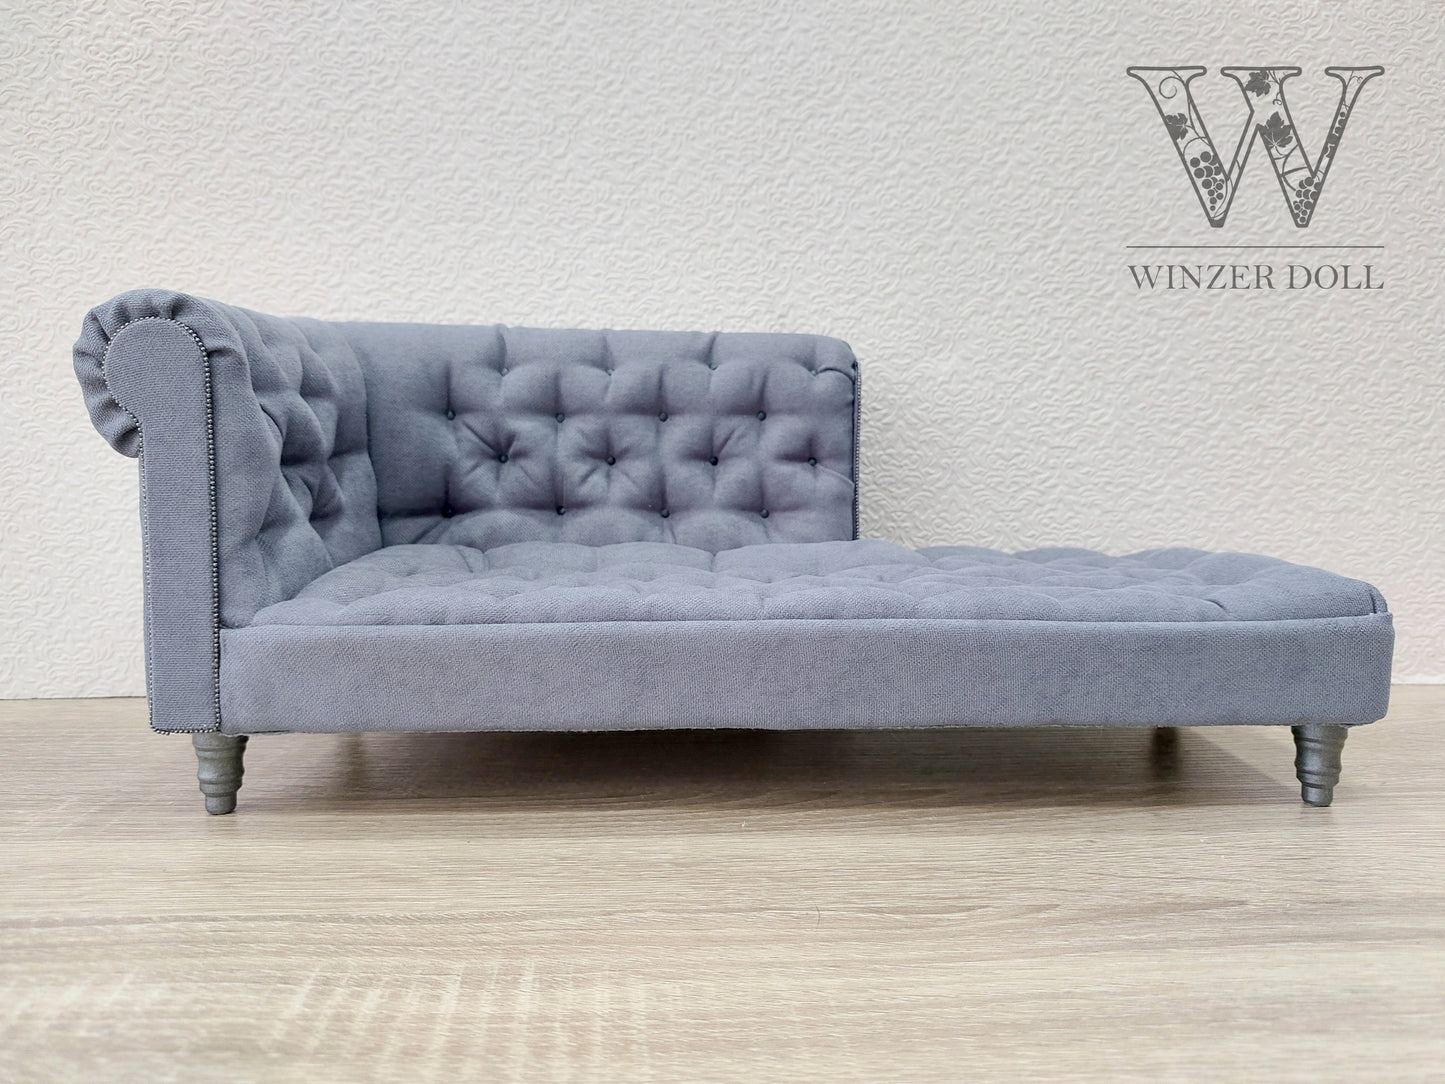 Chesterfield chaise lounge, gray